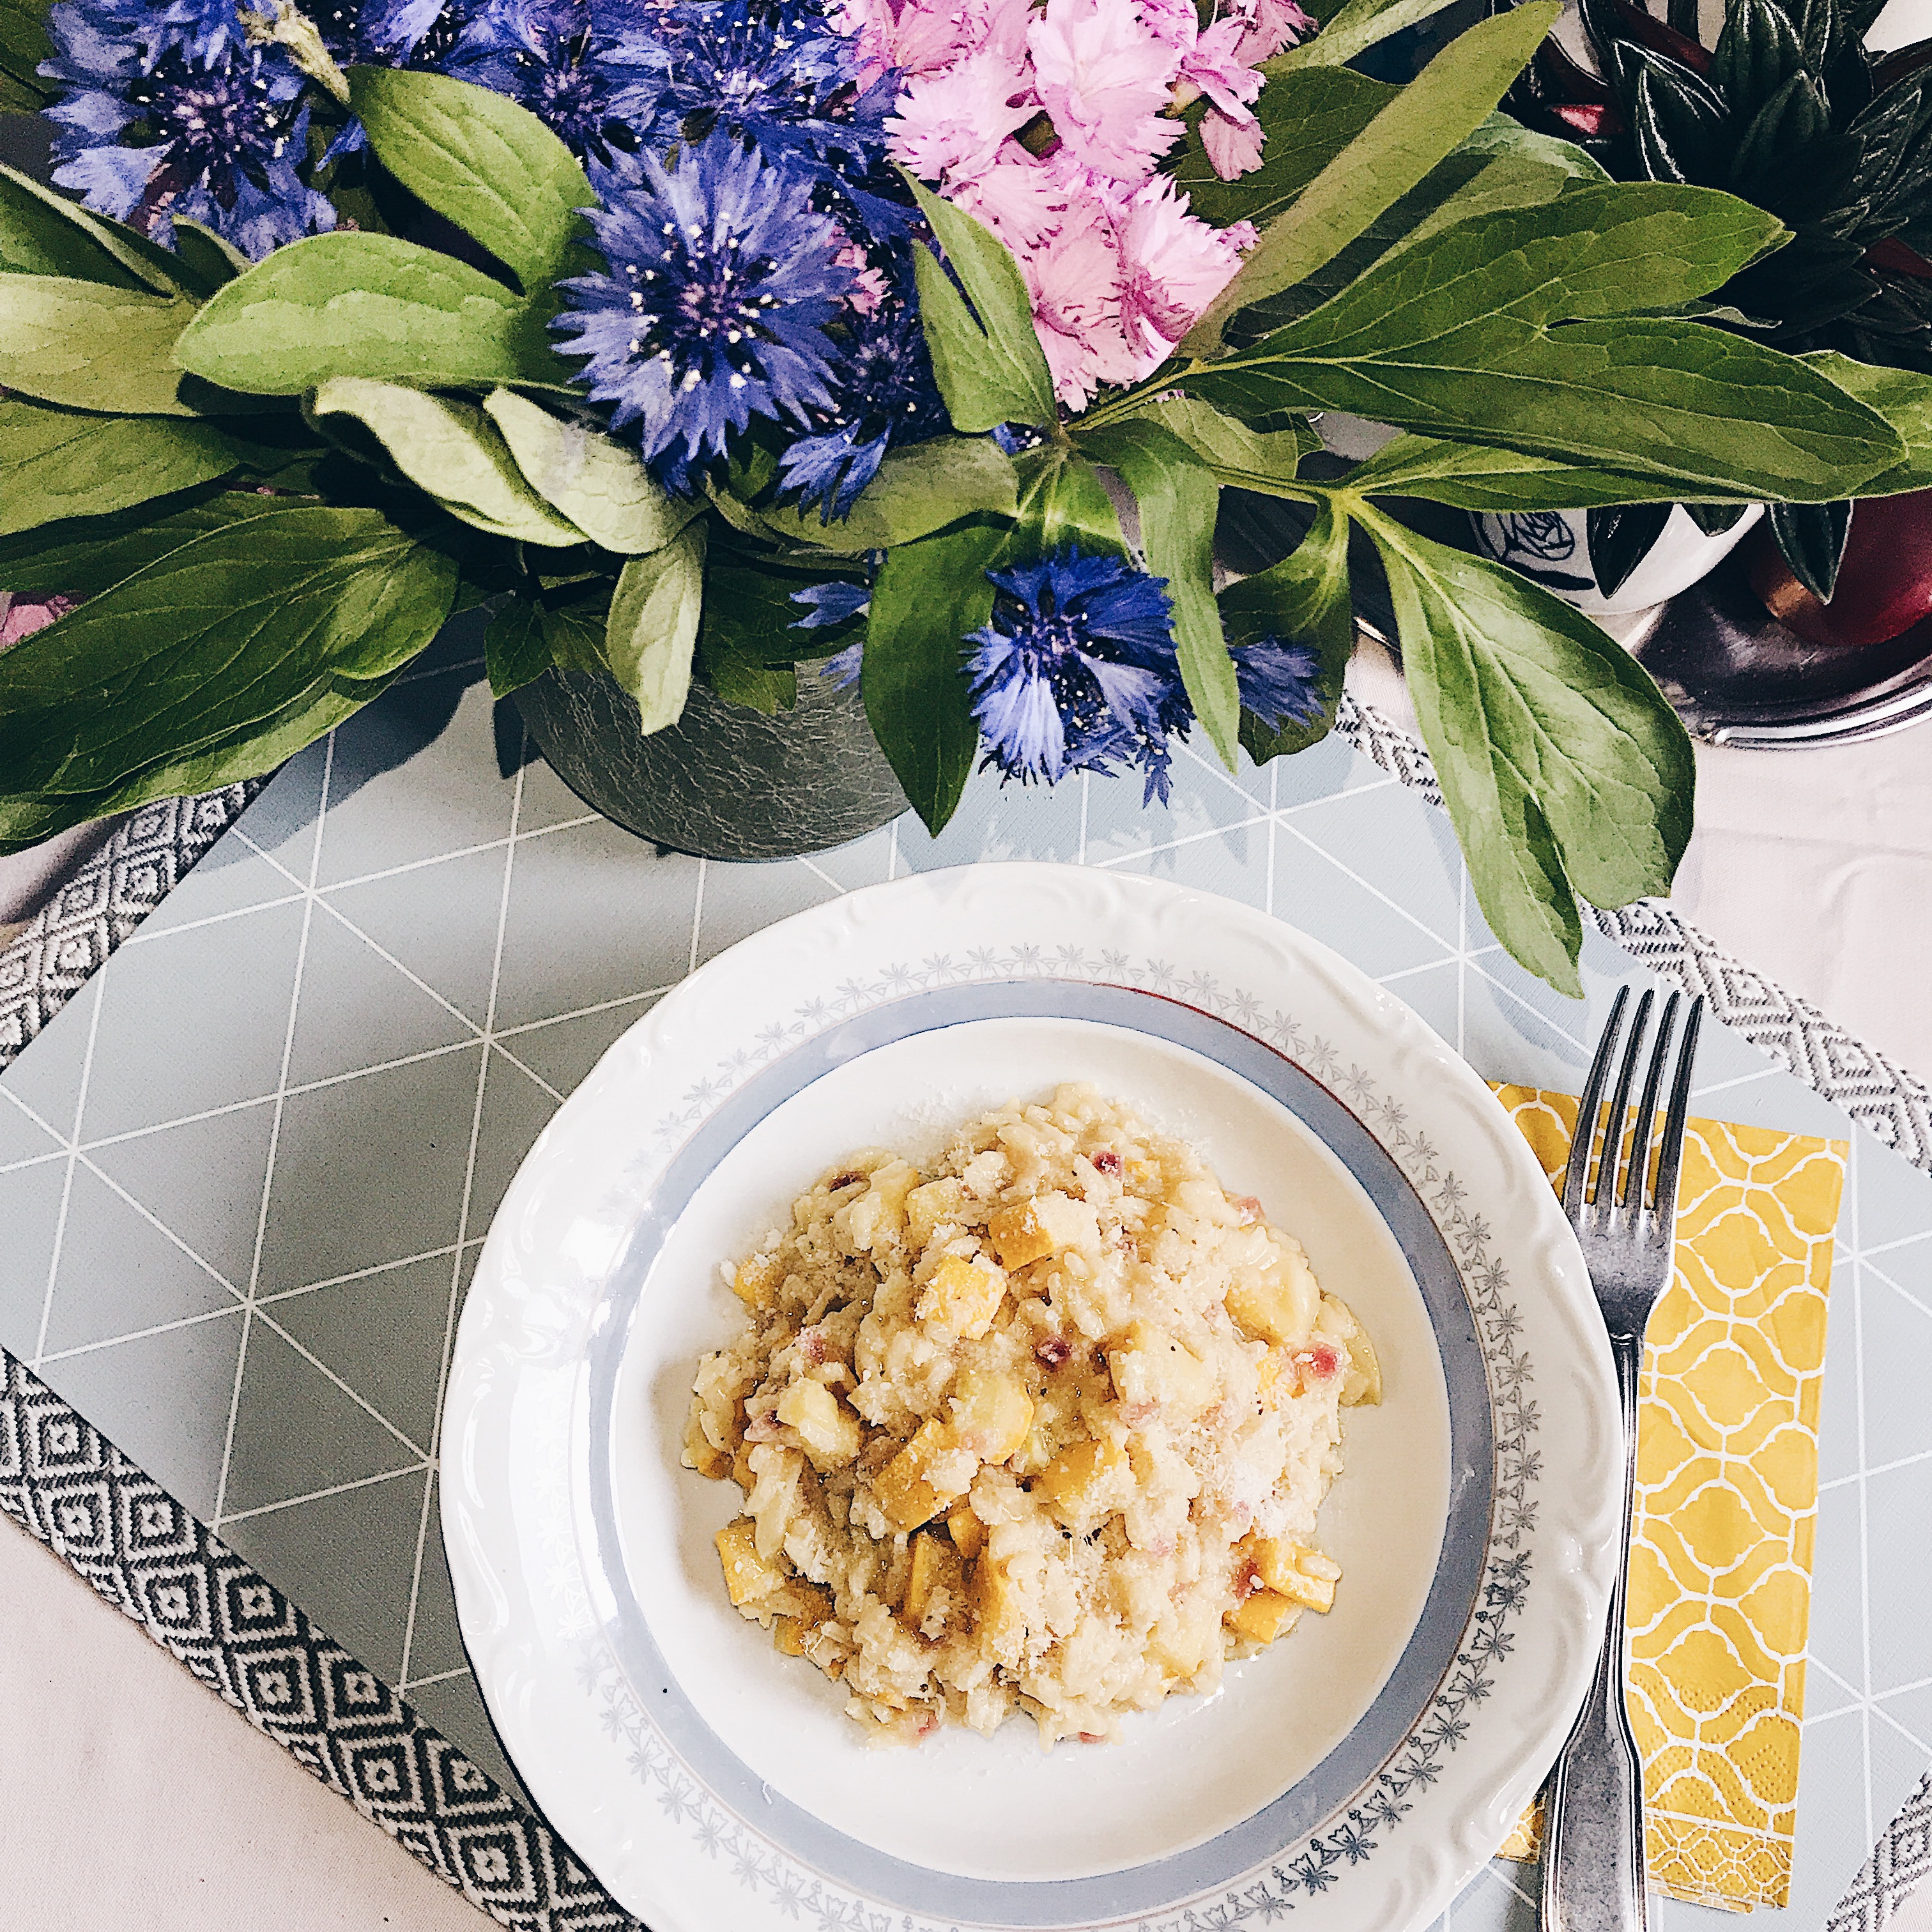 @projectfairytale: Sunny lemony risotto with courgettes and lemon